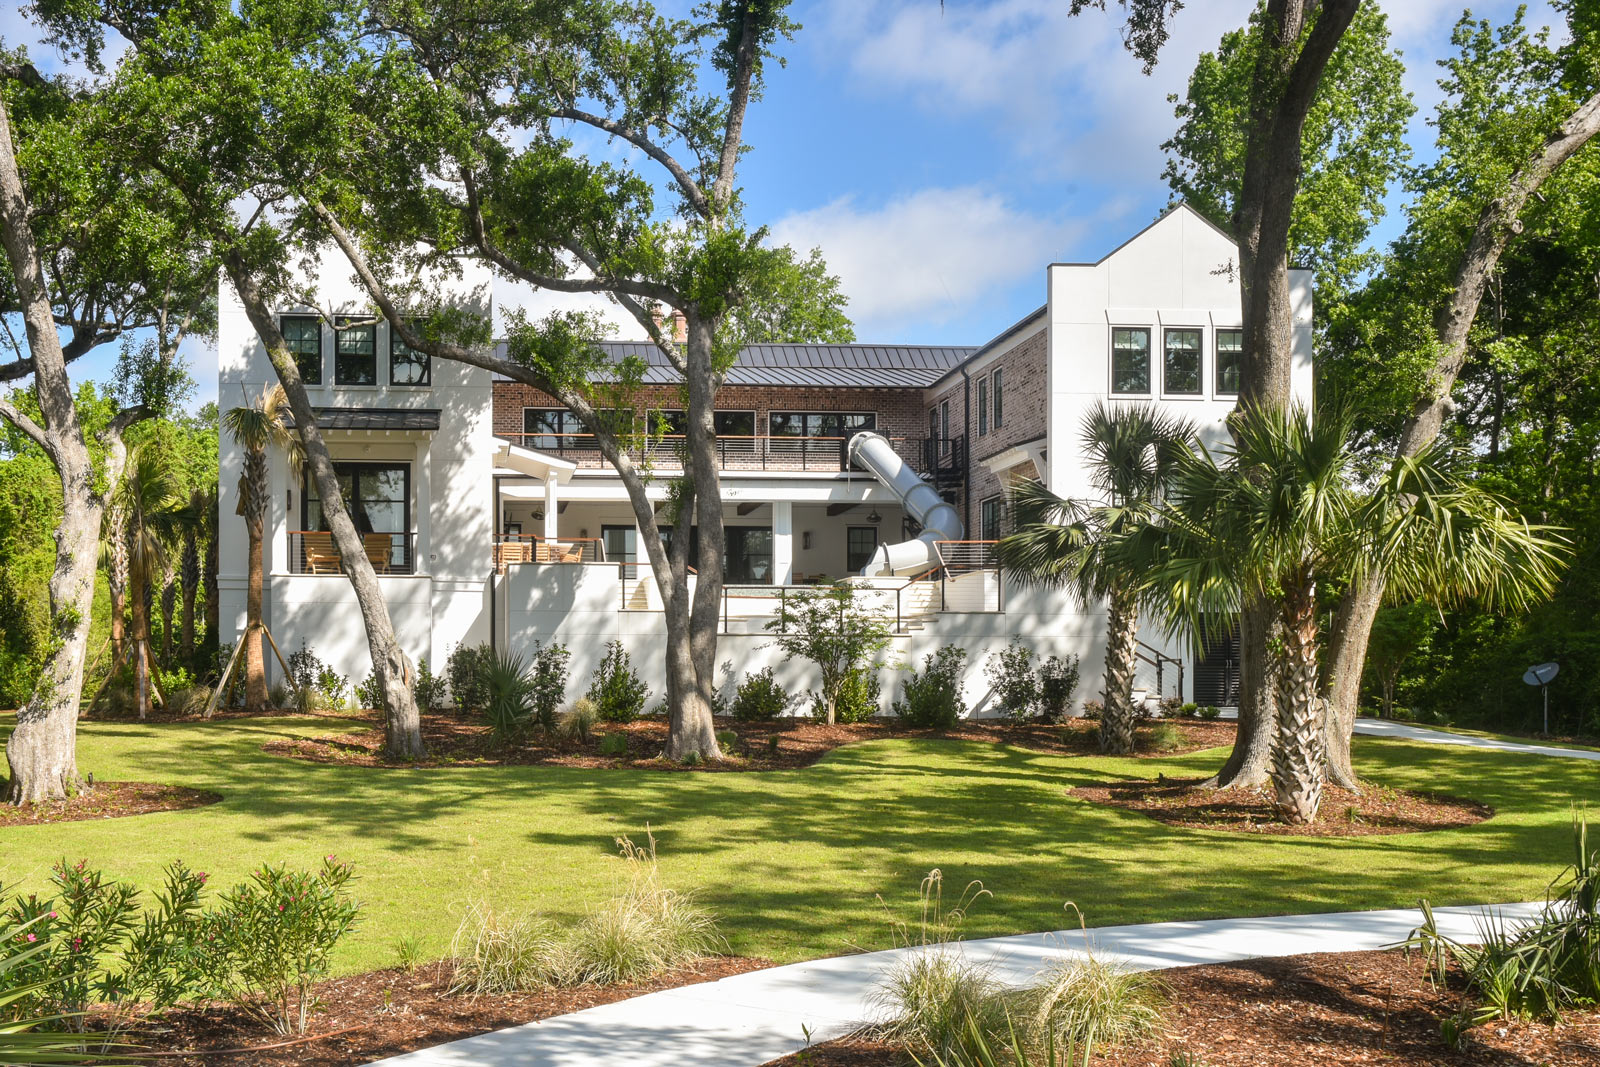 Luxury home on Daniel Island designed by South Carolina Architects, Swallowtail Architecture